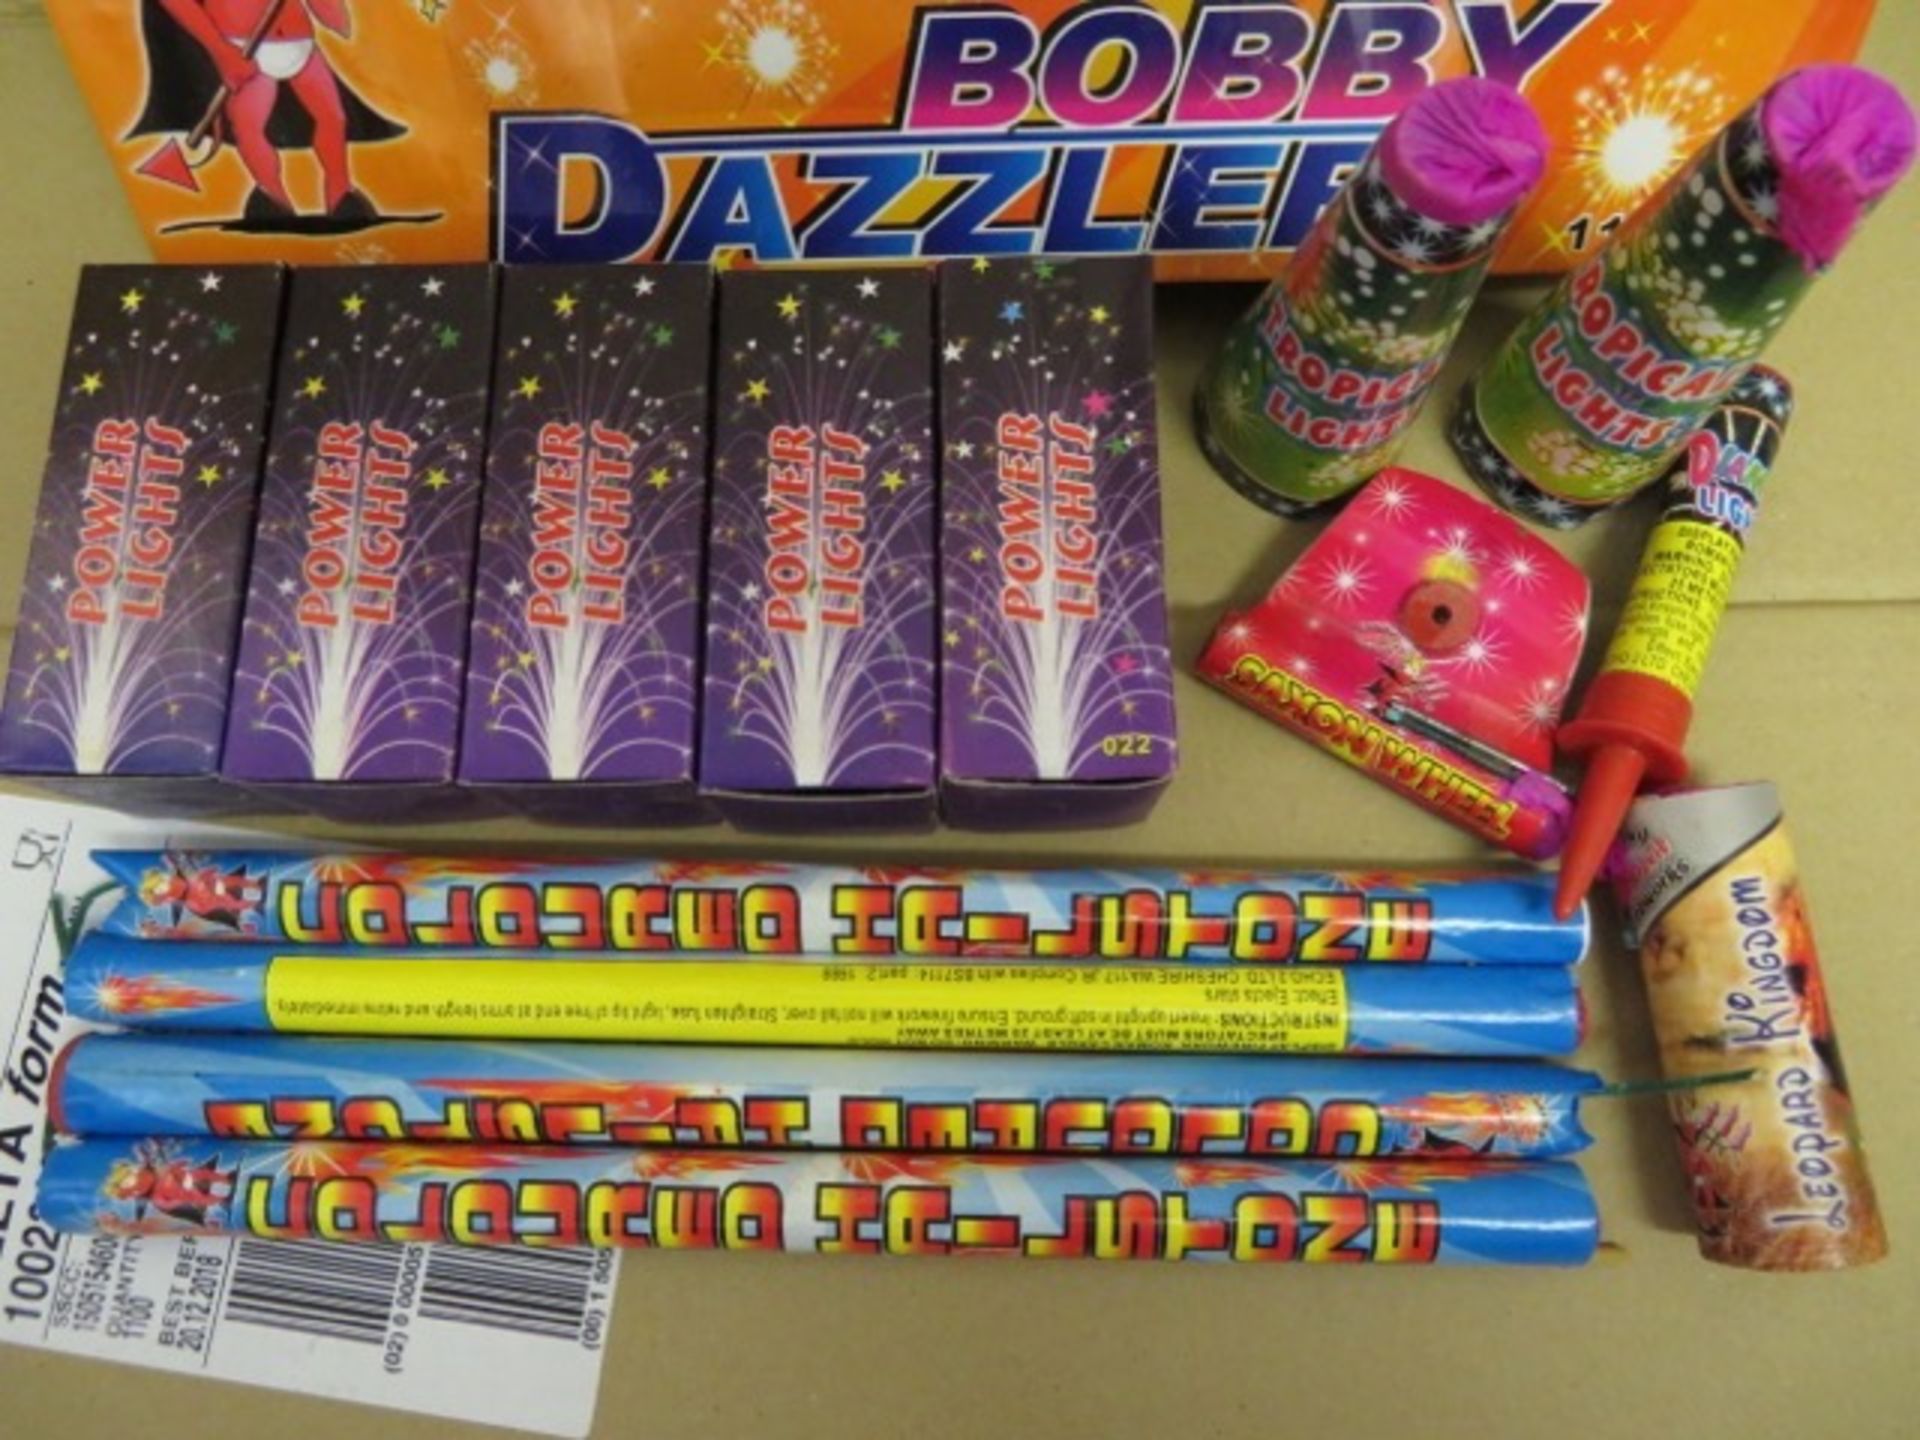 6 x 14 PIECE Bobby Dazzler Firework Selection Boxes. Total of 84 Fireworks to include: 20 x Power - Image 2 of 2